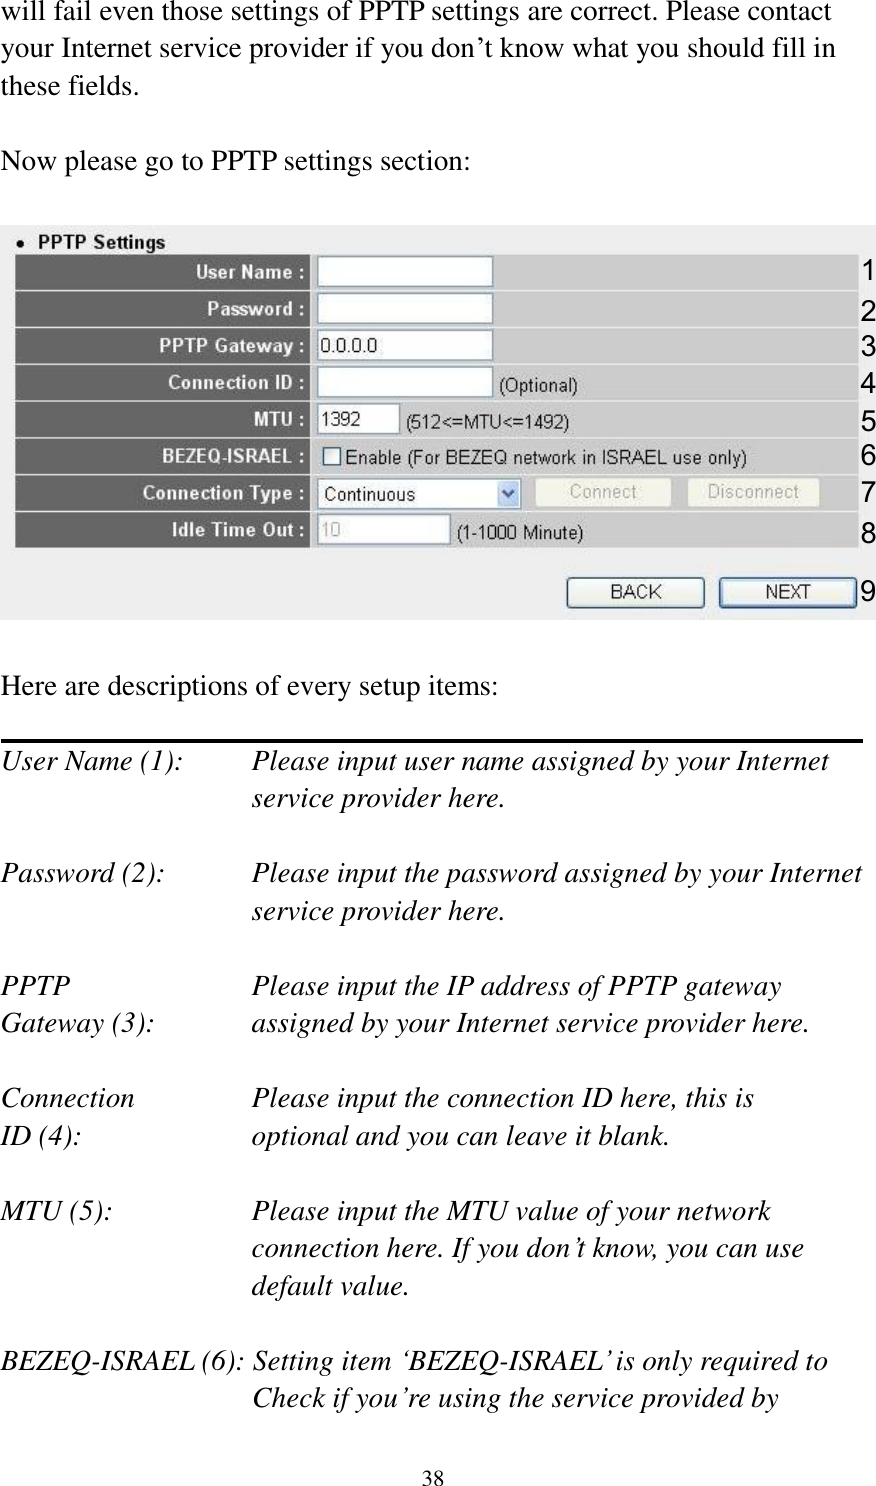 38 will fail even those settings of PPTP settings are correct. Please contact your Internet service provider if you don‟t know what you should fill in these fields.  Now please go to PPTP settings section:    Here are descriptions of every setup items:  User Name (1):    Please input user name assigned by your Internet service provider here.  Password (2):    Please input the password assigned by your Internet service provider here.  PPTP    Please input the IP address of PPTP gateway Gateway (3):    assigned by your Internet service provider here.  Connection       Please input the connection ID here, this is ID (4):         optional and you can leave it blank.  MTU (5):    Please input the MTU value of your network connection here. If you don‟t know, you can use default value.  BEZEQ-ISRAEL (6): Setting item „BEZEQ-ISRAEL‟ is only required to Check if you‟re using the service provided by 1 2 3 4 5 6 7 9 8 